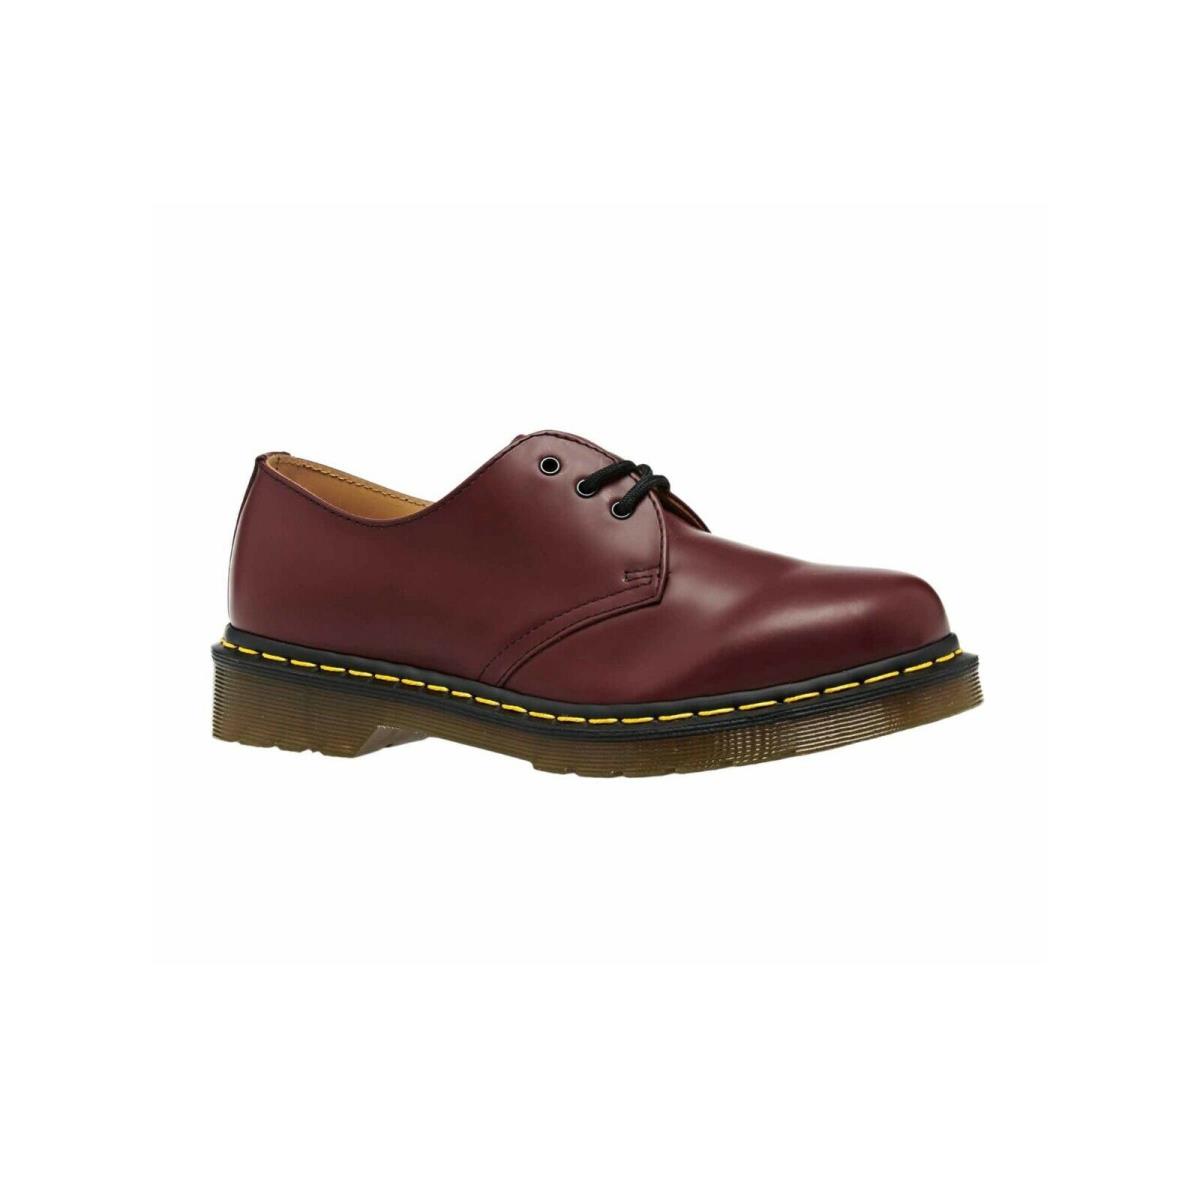 Dr Martens 1461 Cherry Red Smooth Leather Men Women Platform Shoes